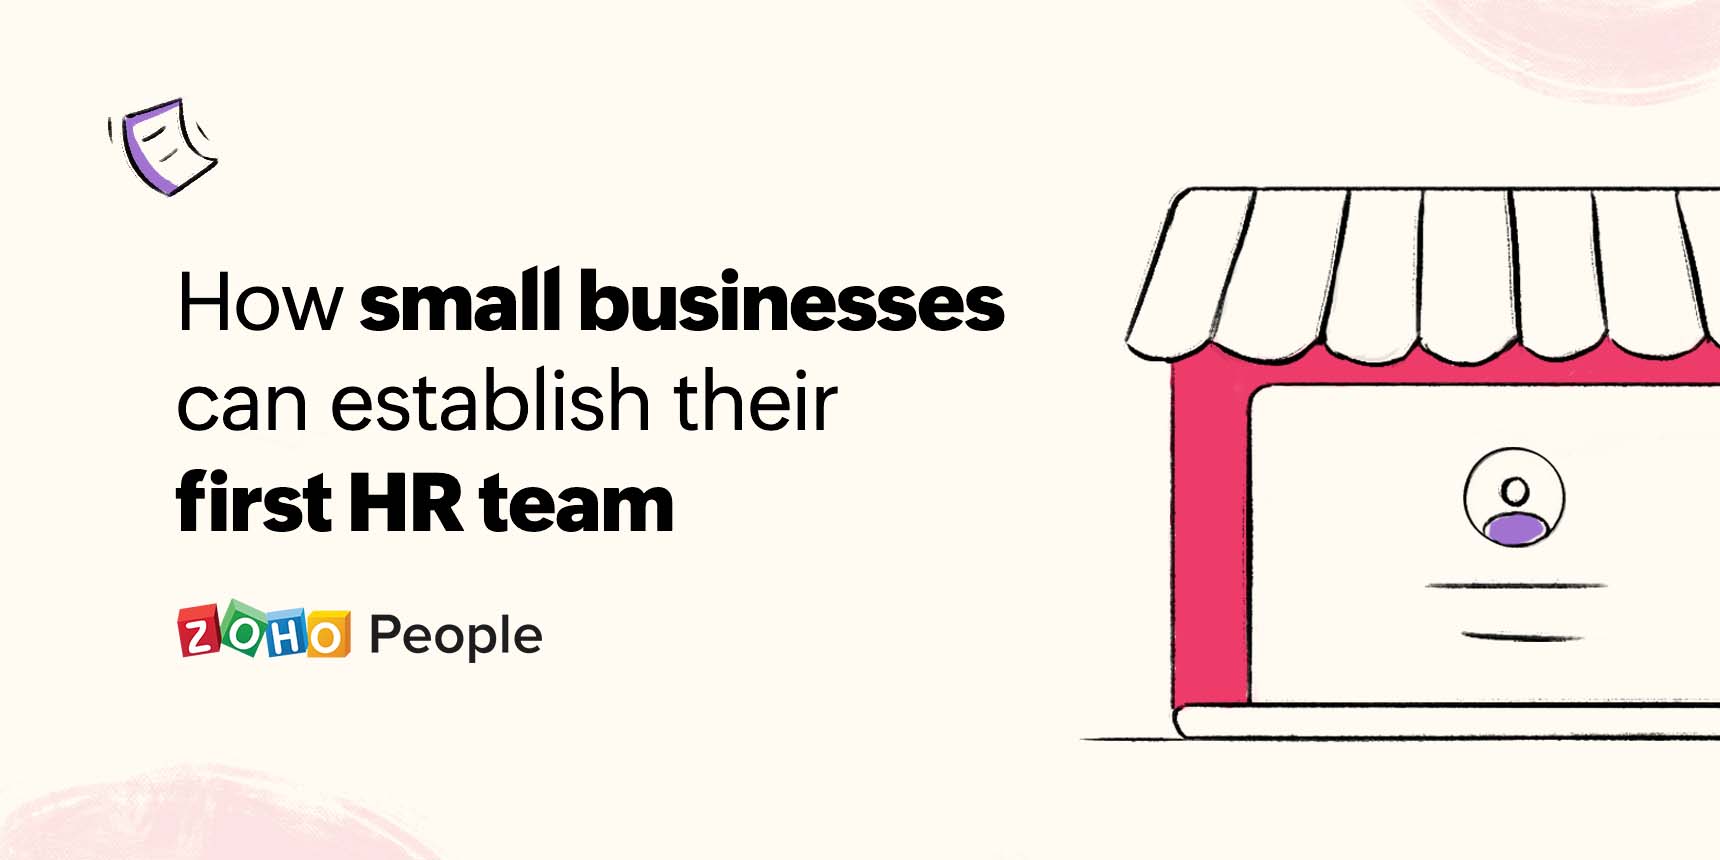 How small businesses can set up their First HR team